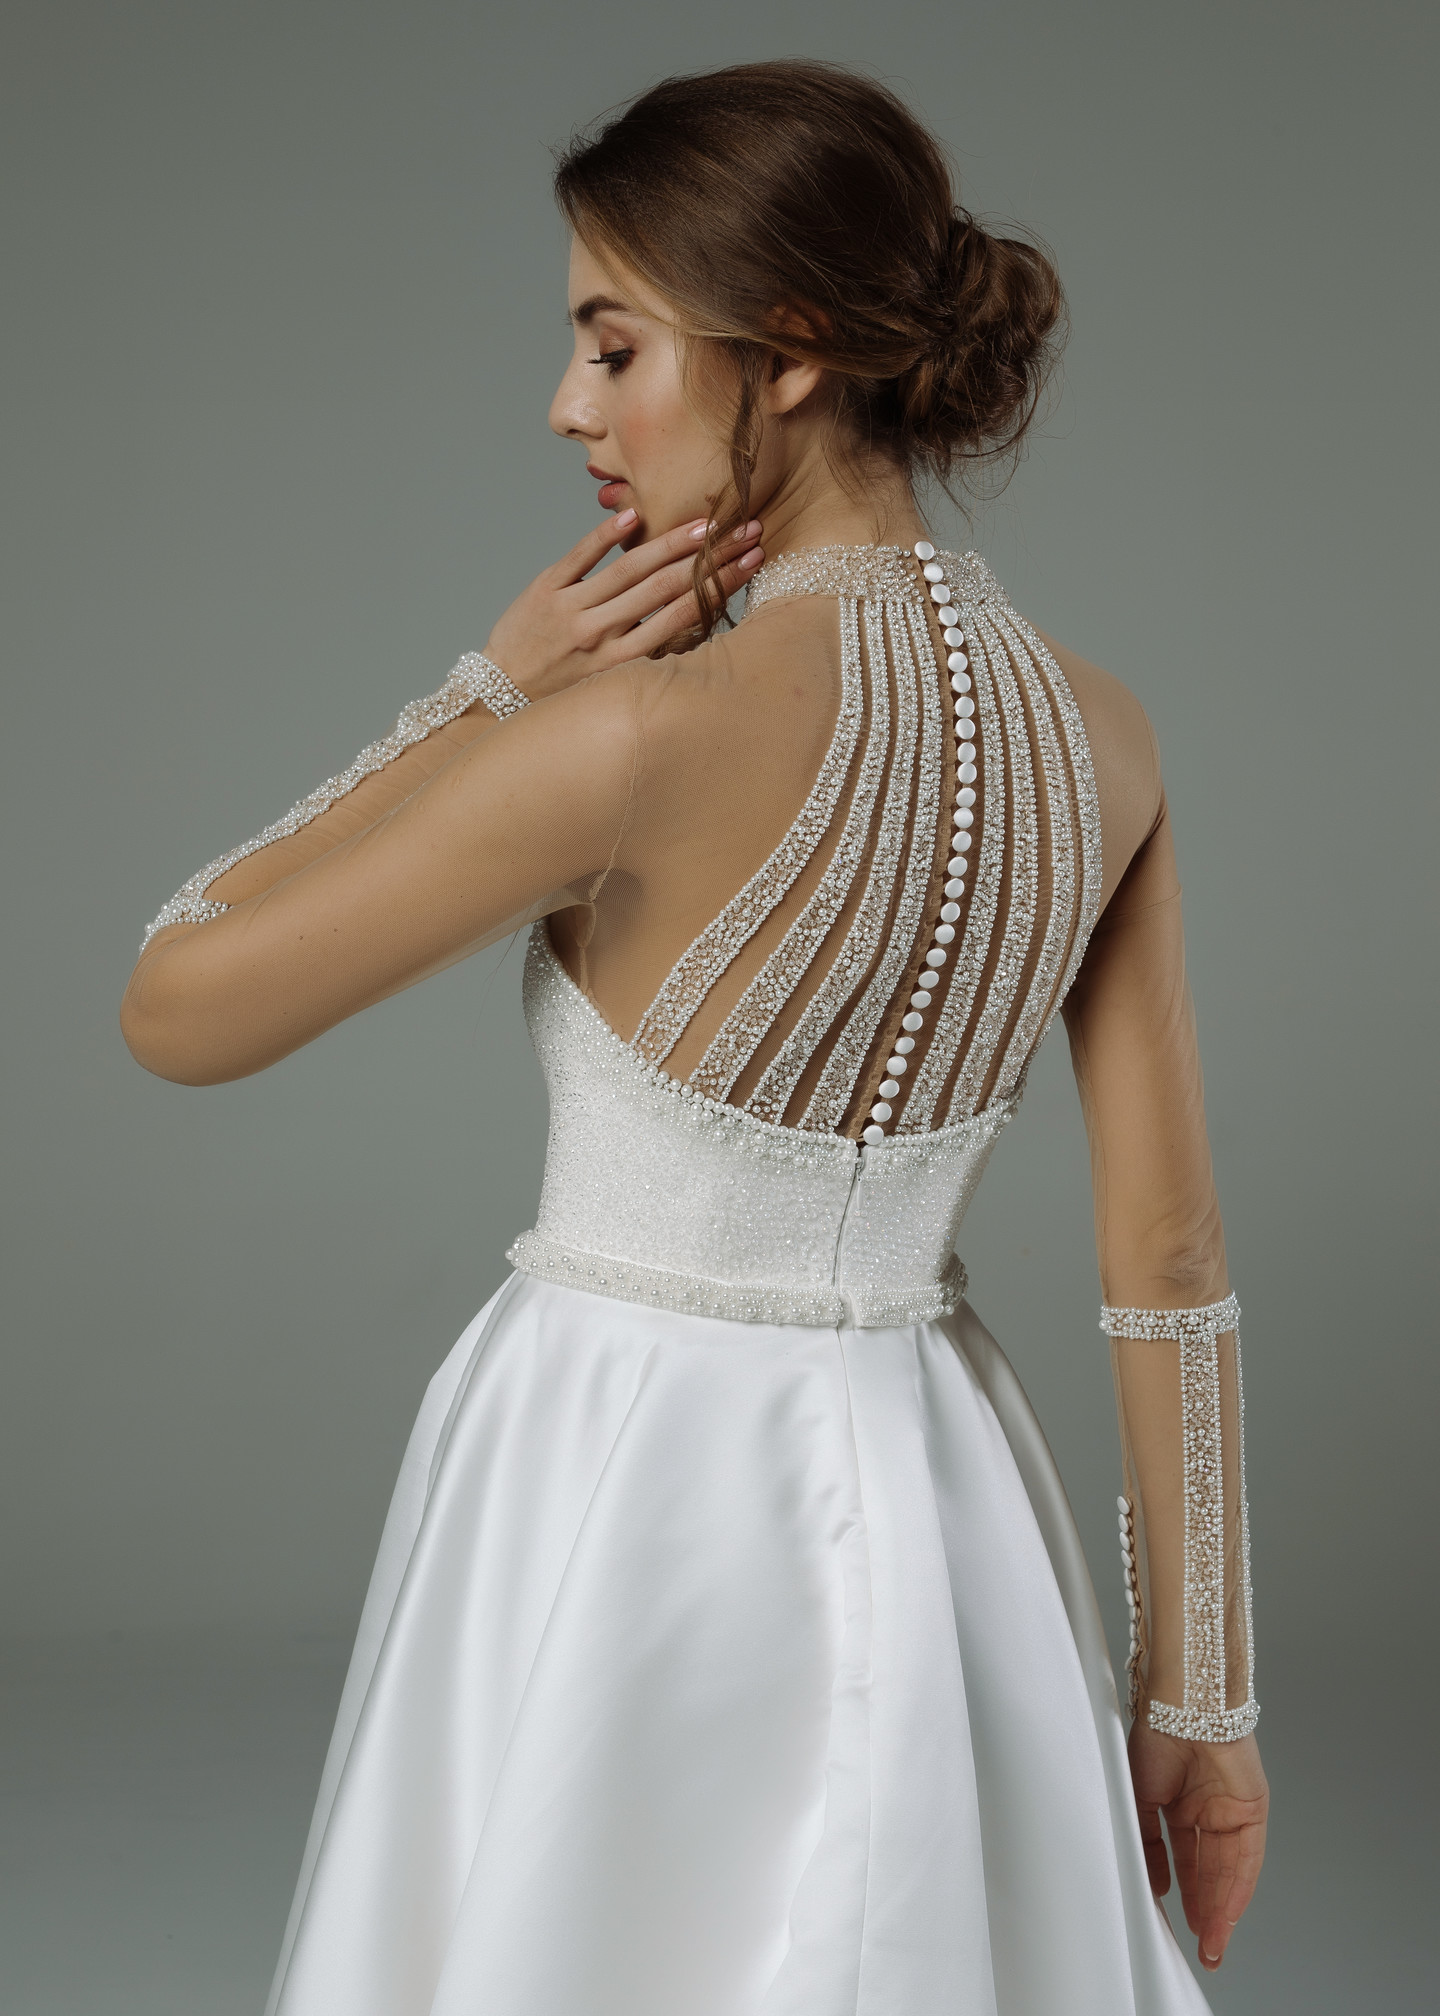 Magali gown, 2019, couture, dress, bridal, off-white, satin, embroidery, train, sleeves, A-line, archive